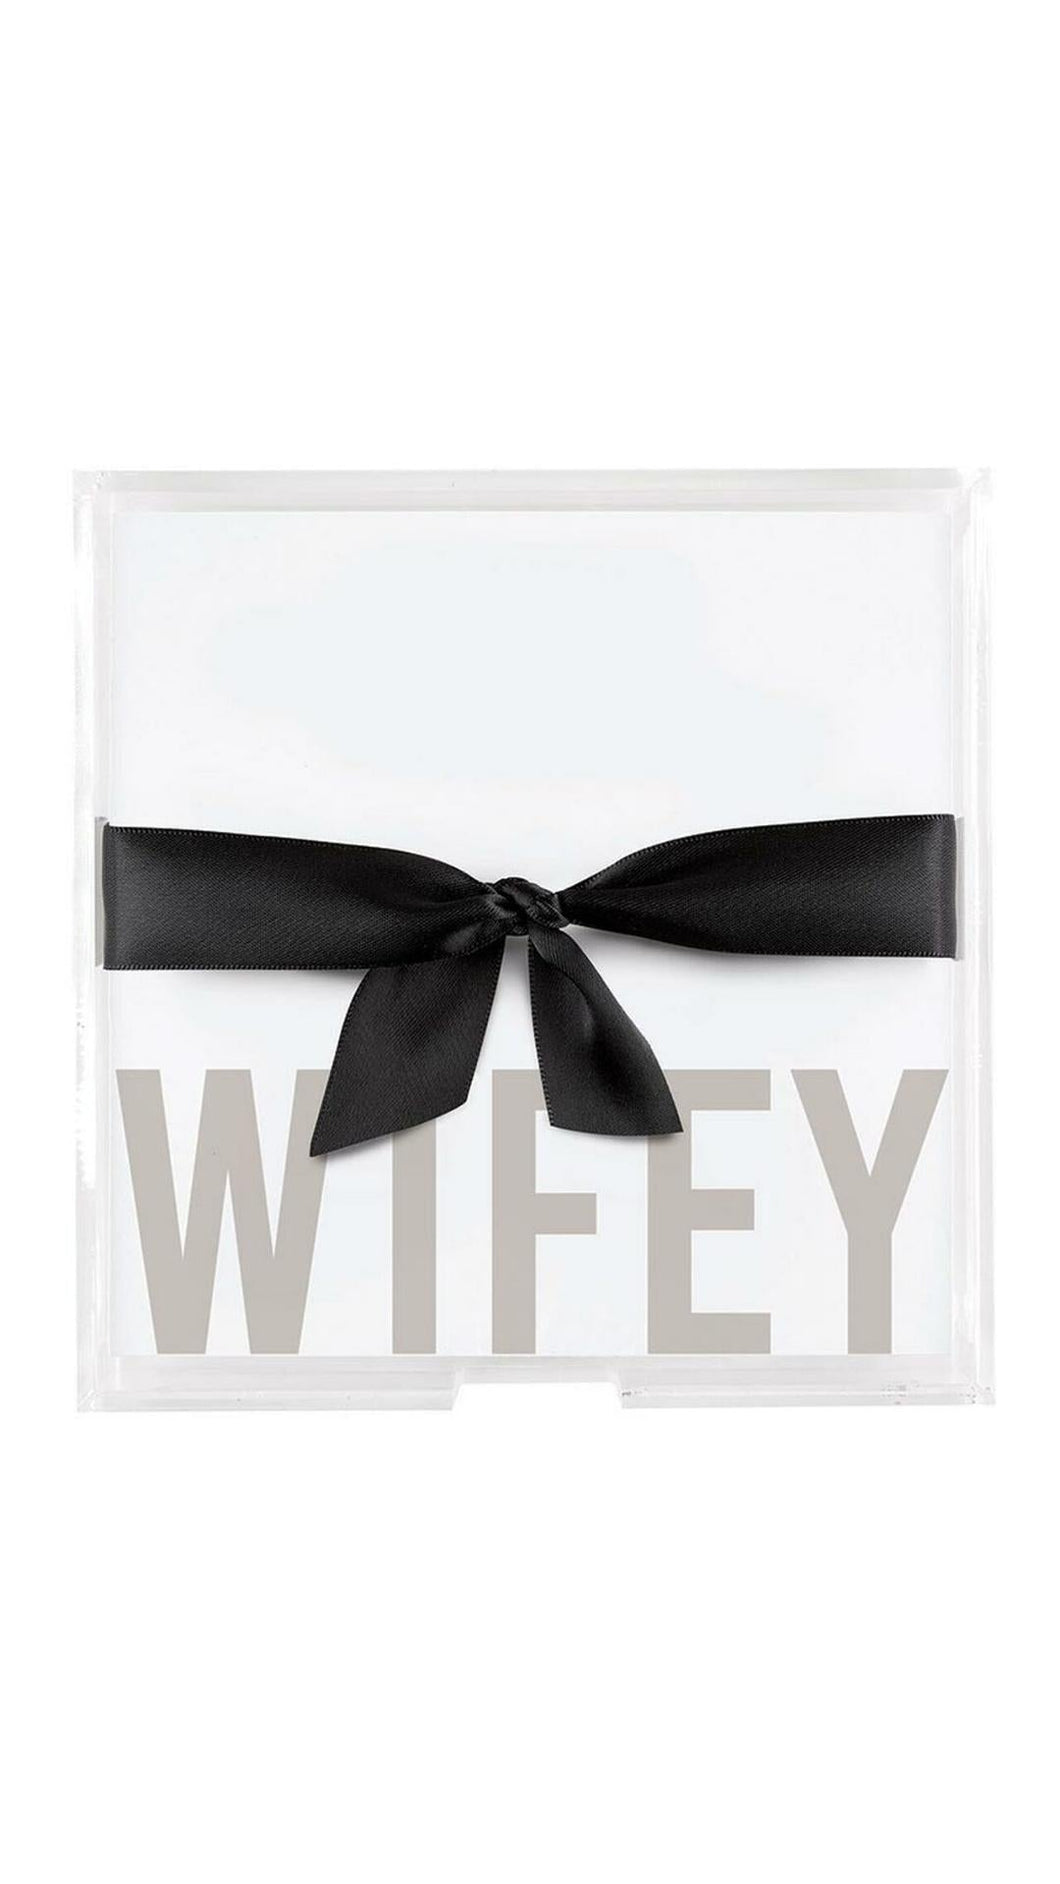 Wifey Square Notepaper in Acrylic Tray